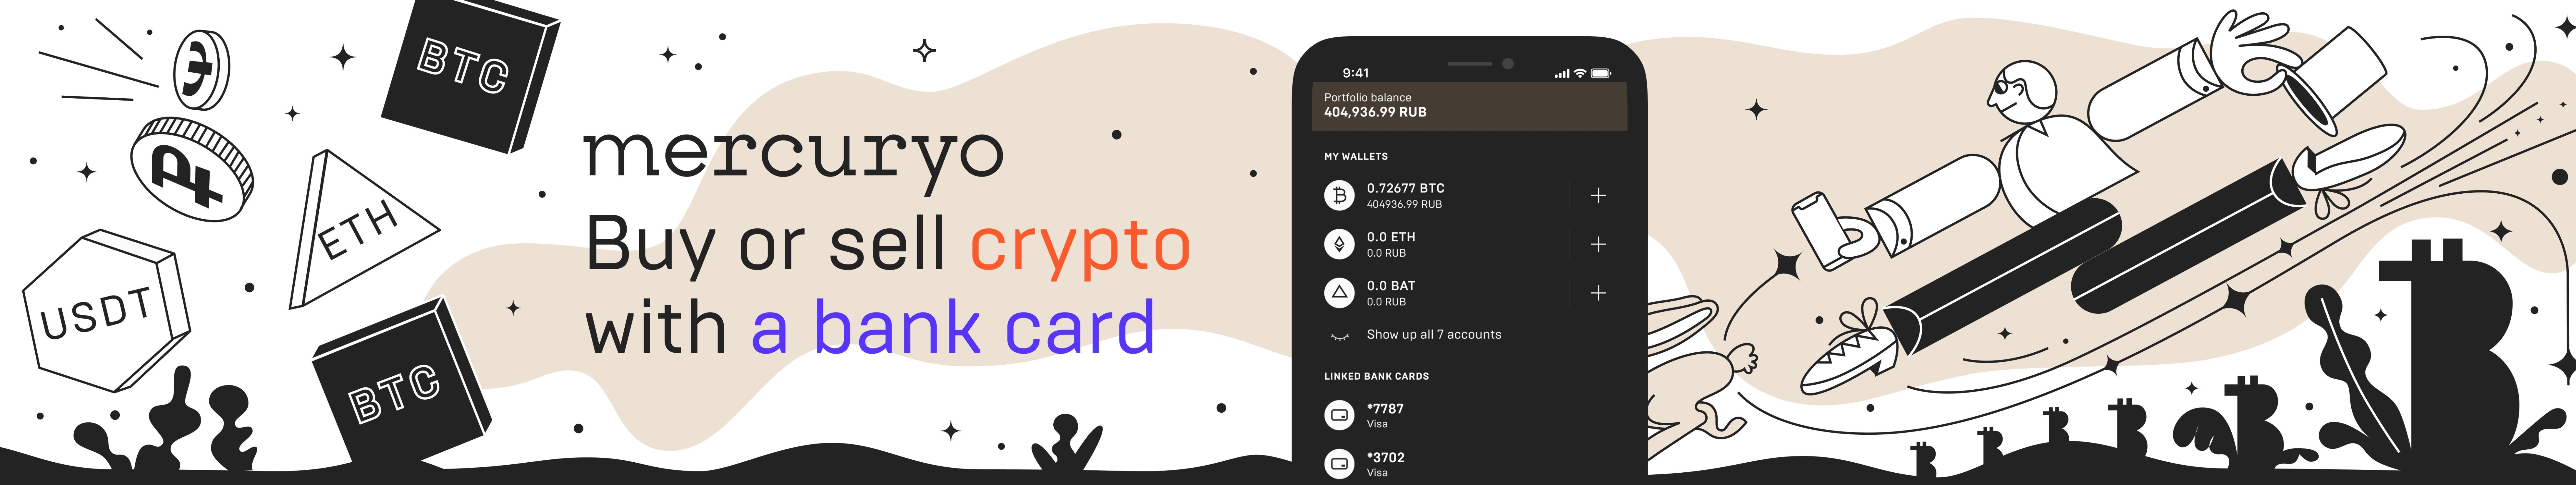 Crypto-backed card for daily expenses issued by Mercuryo. Just like your regular dedit card, but in crypto.